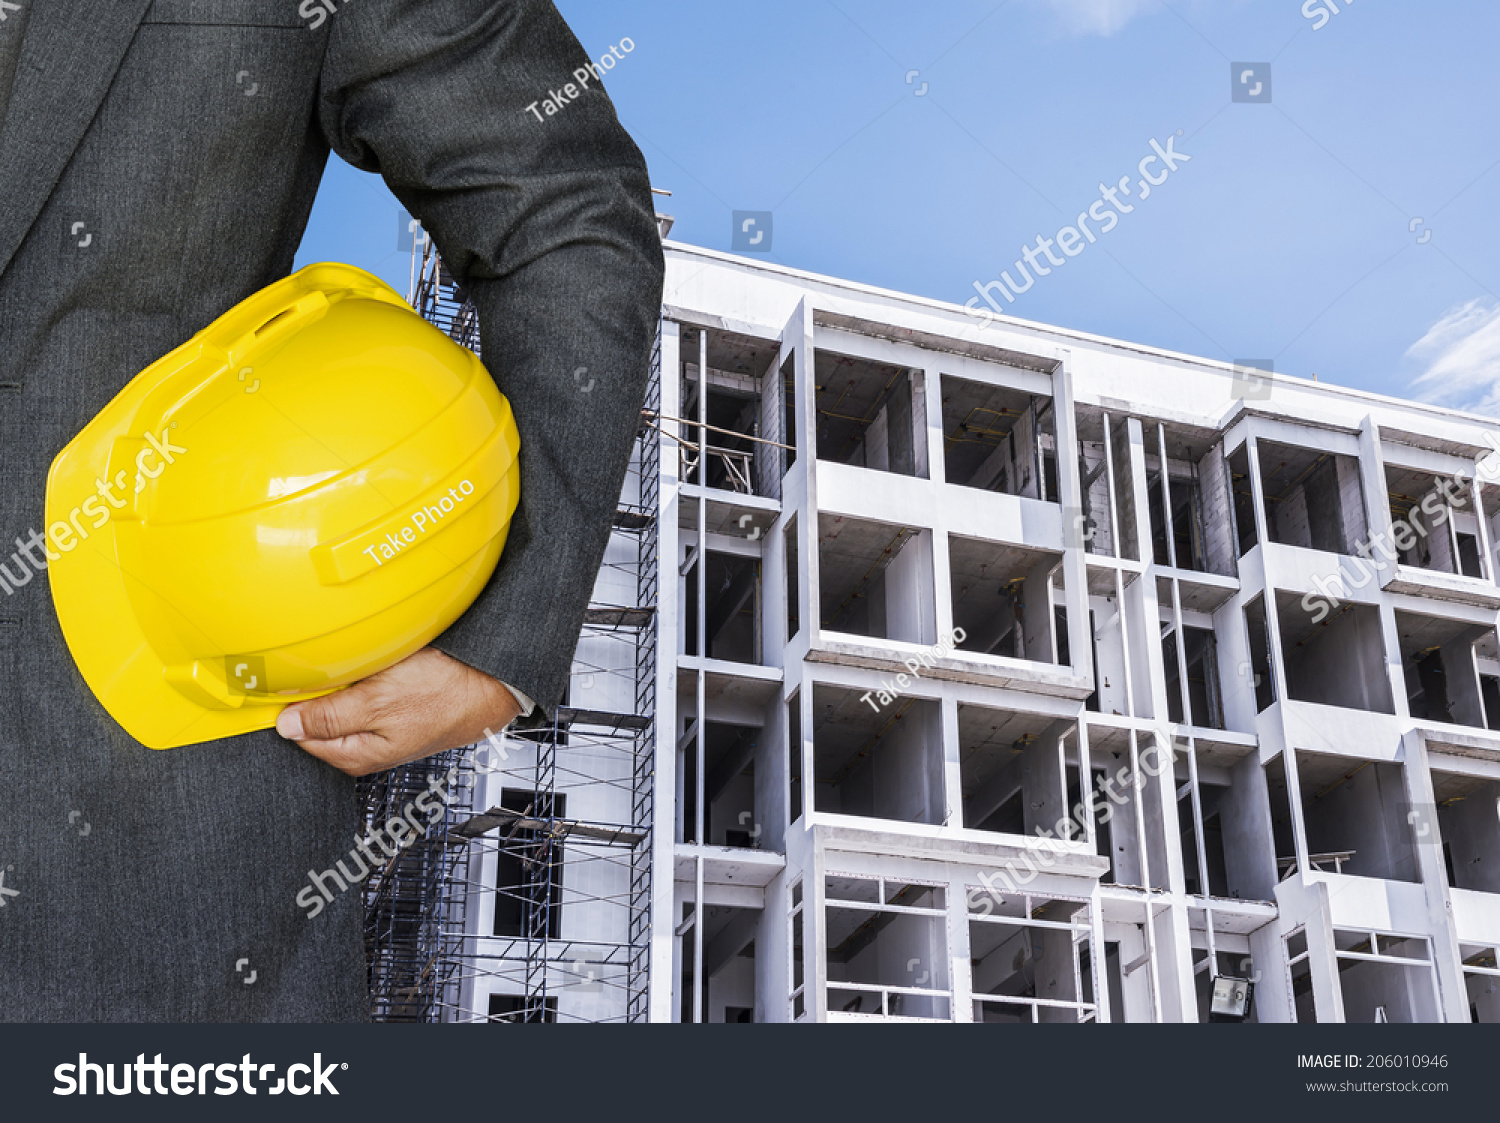 Engineer hand holding yellow helmet against the background of building under construction  #206010946